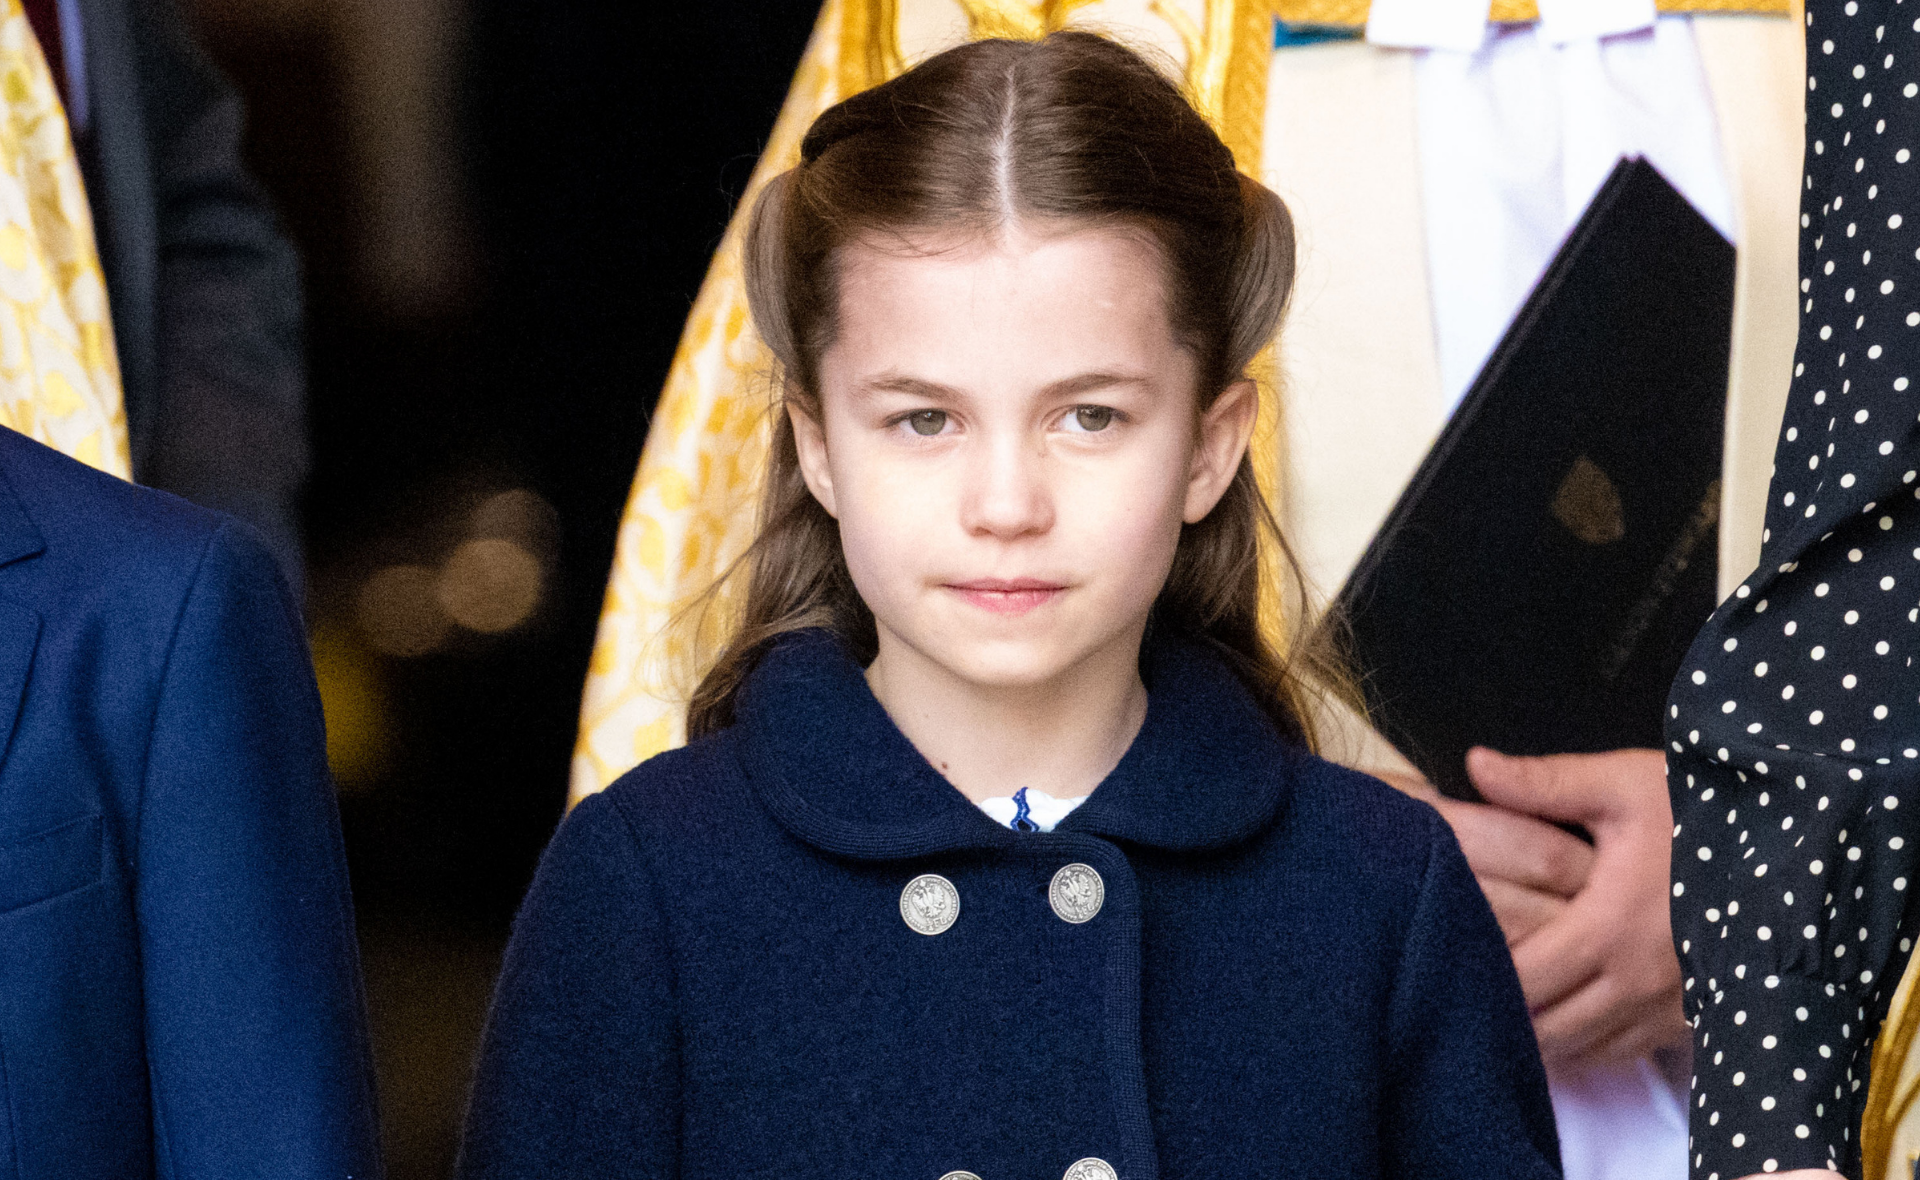 Who does Princess Charlotte look most like? From Catherine, to Princess Diana and even the Queen